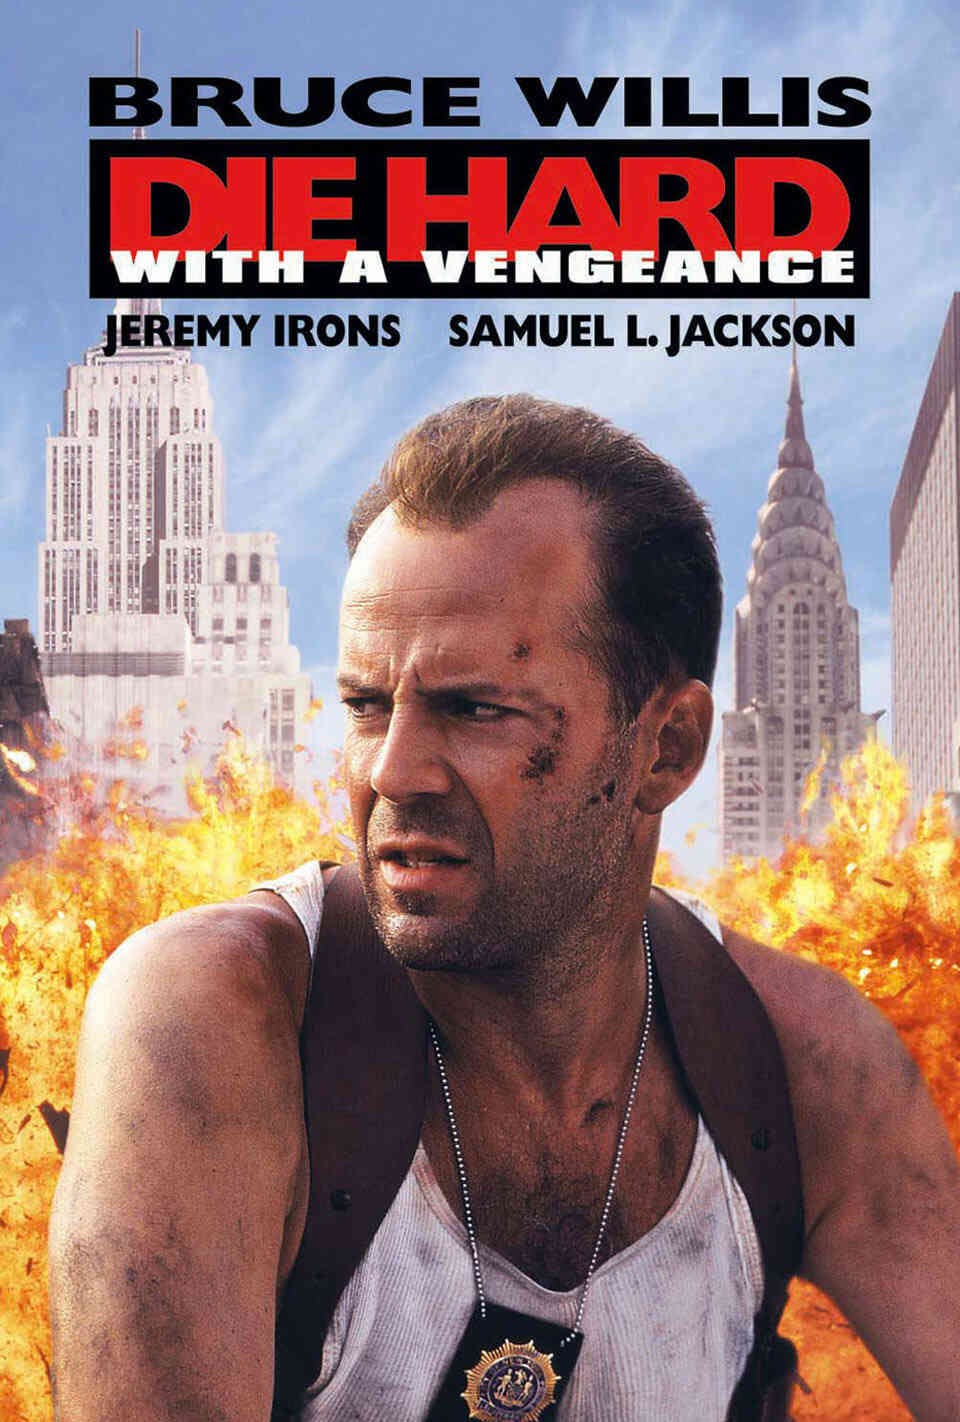 Read Die Hard with a Vengeance screenplay.